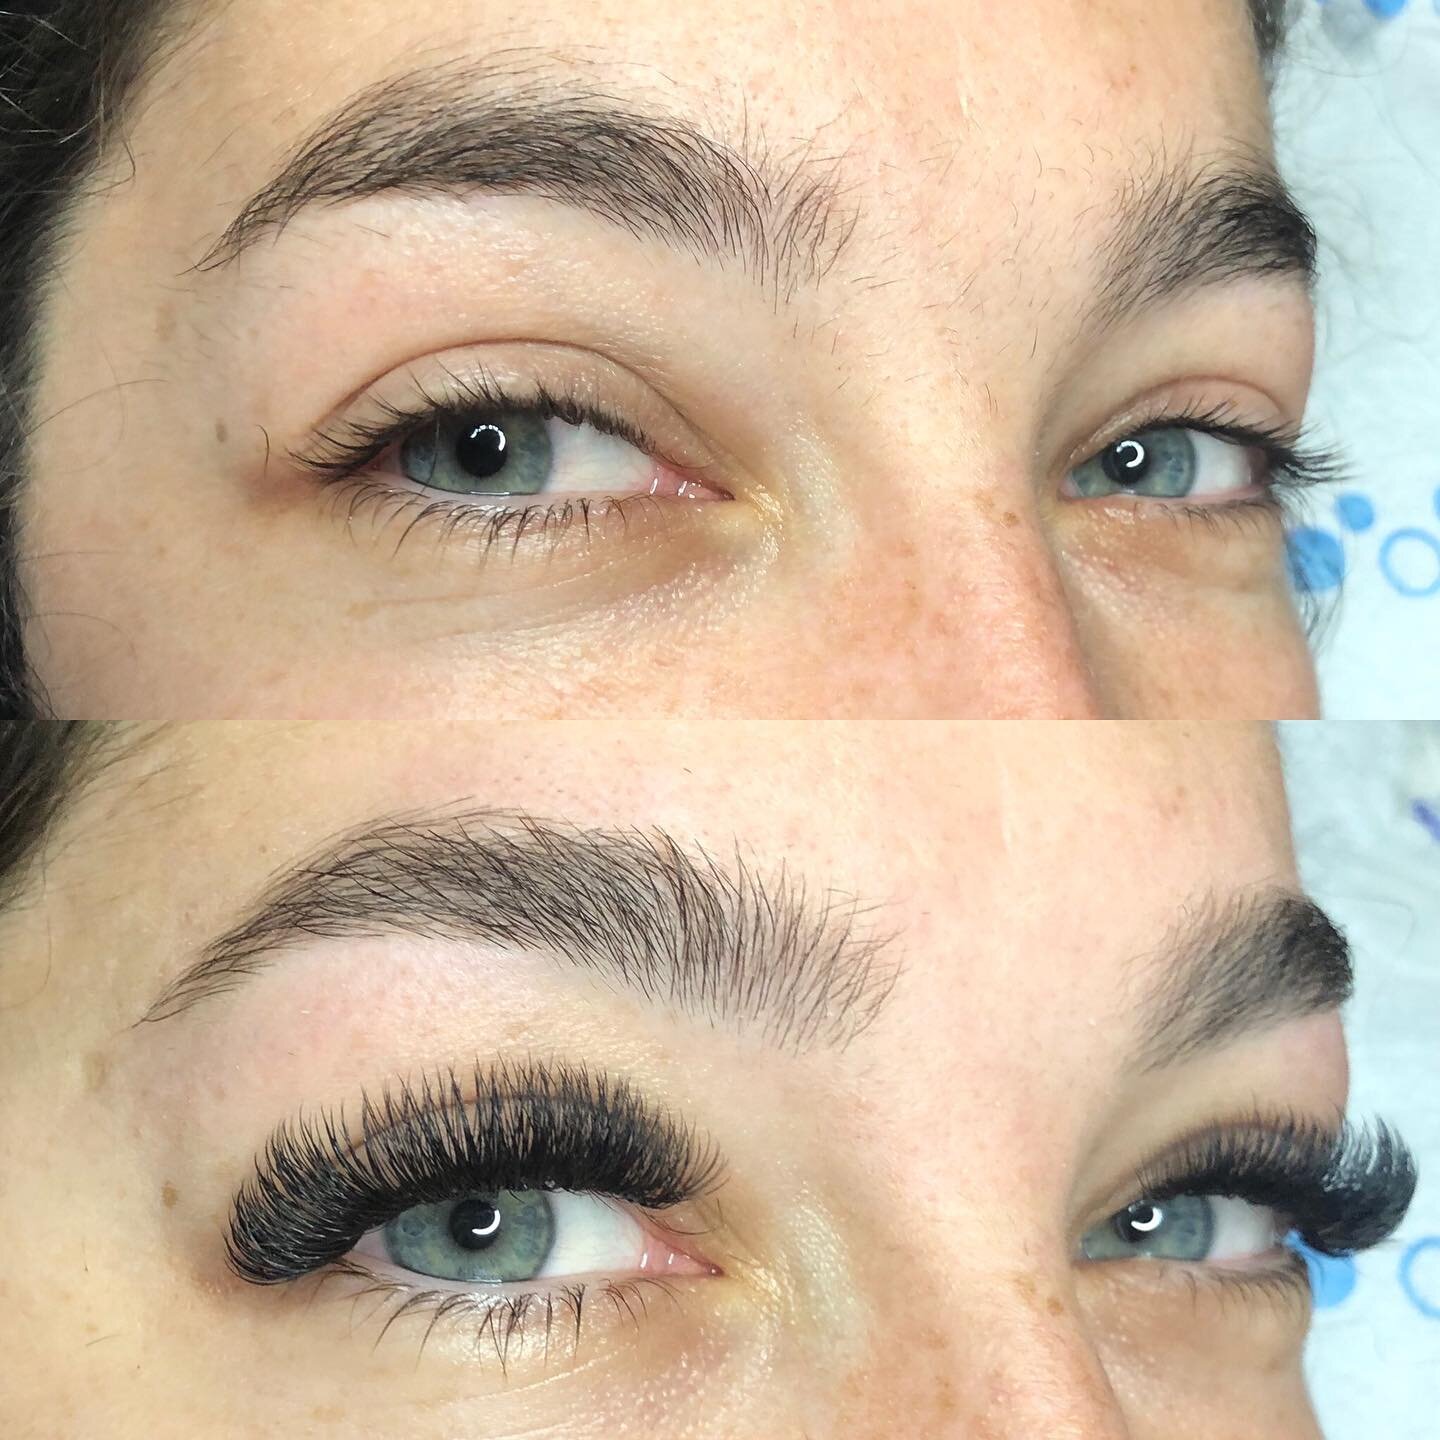 Gorgeous full set of volumes and eyebrow thread for my beautiful client 🥰🙏🏻 before and after pics always do THE MOOOOST 🥺🥰💕
.
.
.

To Get Lashed:

via my Instagram &ldquo;Book&rdquo; button 

Come in and have a full consultation to discuss what